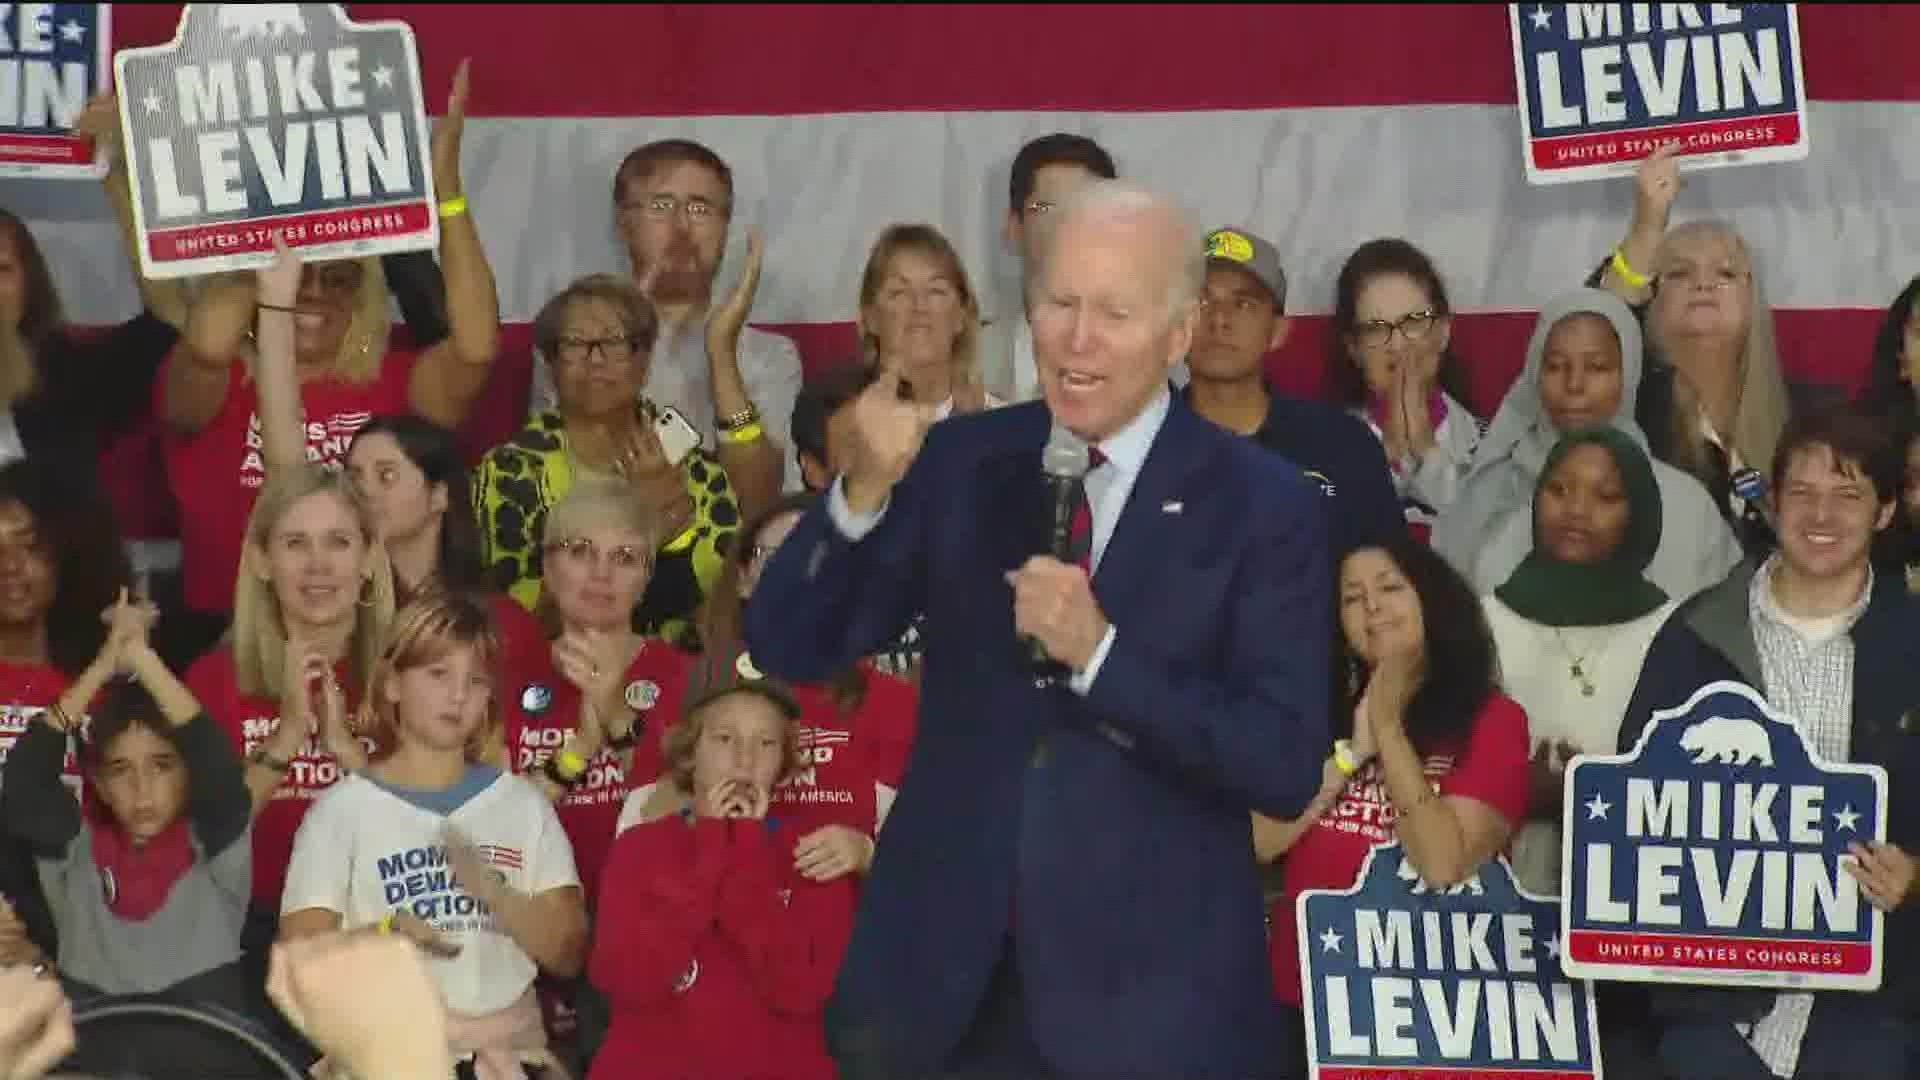 Biden will spend two days in San Diego, part of a four-state campaign swing for Democrats in tight races just days away from Election Day.